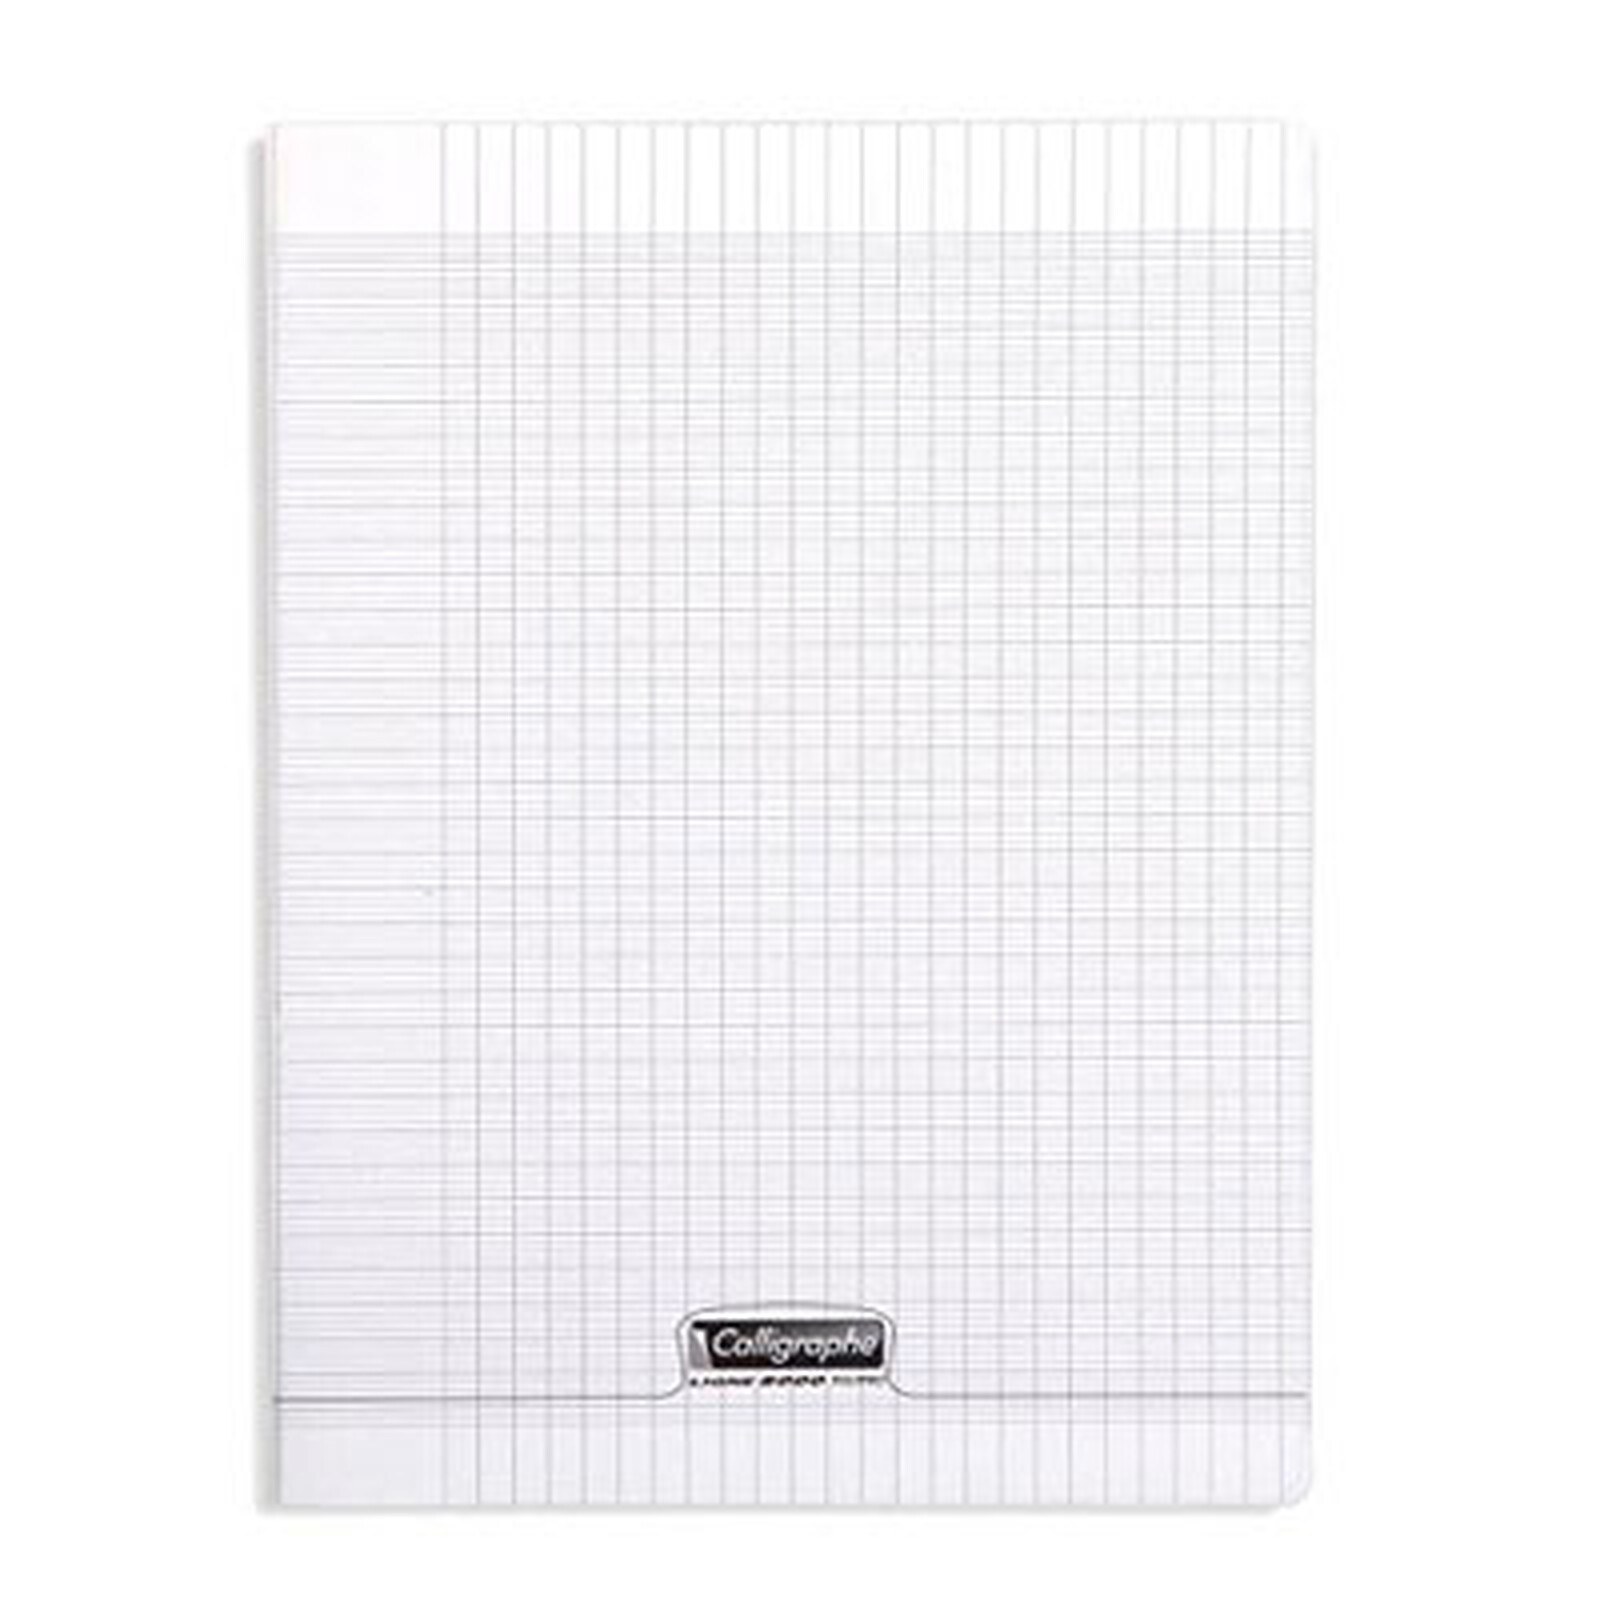 Calligraphe 8000 Polypro Cahier 96 pages 24 x 32 cm seyes grands carreaux  Incolore - Cahier - LDLC